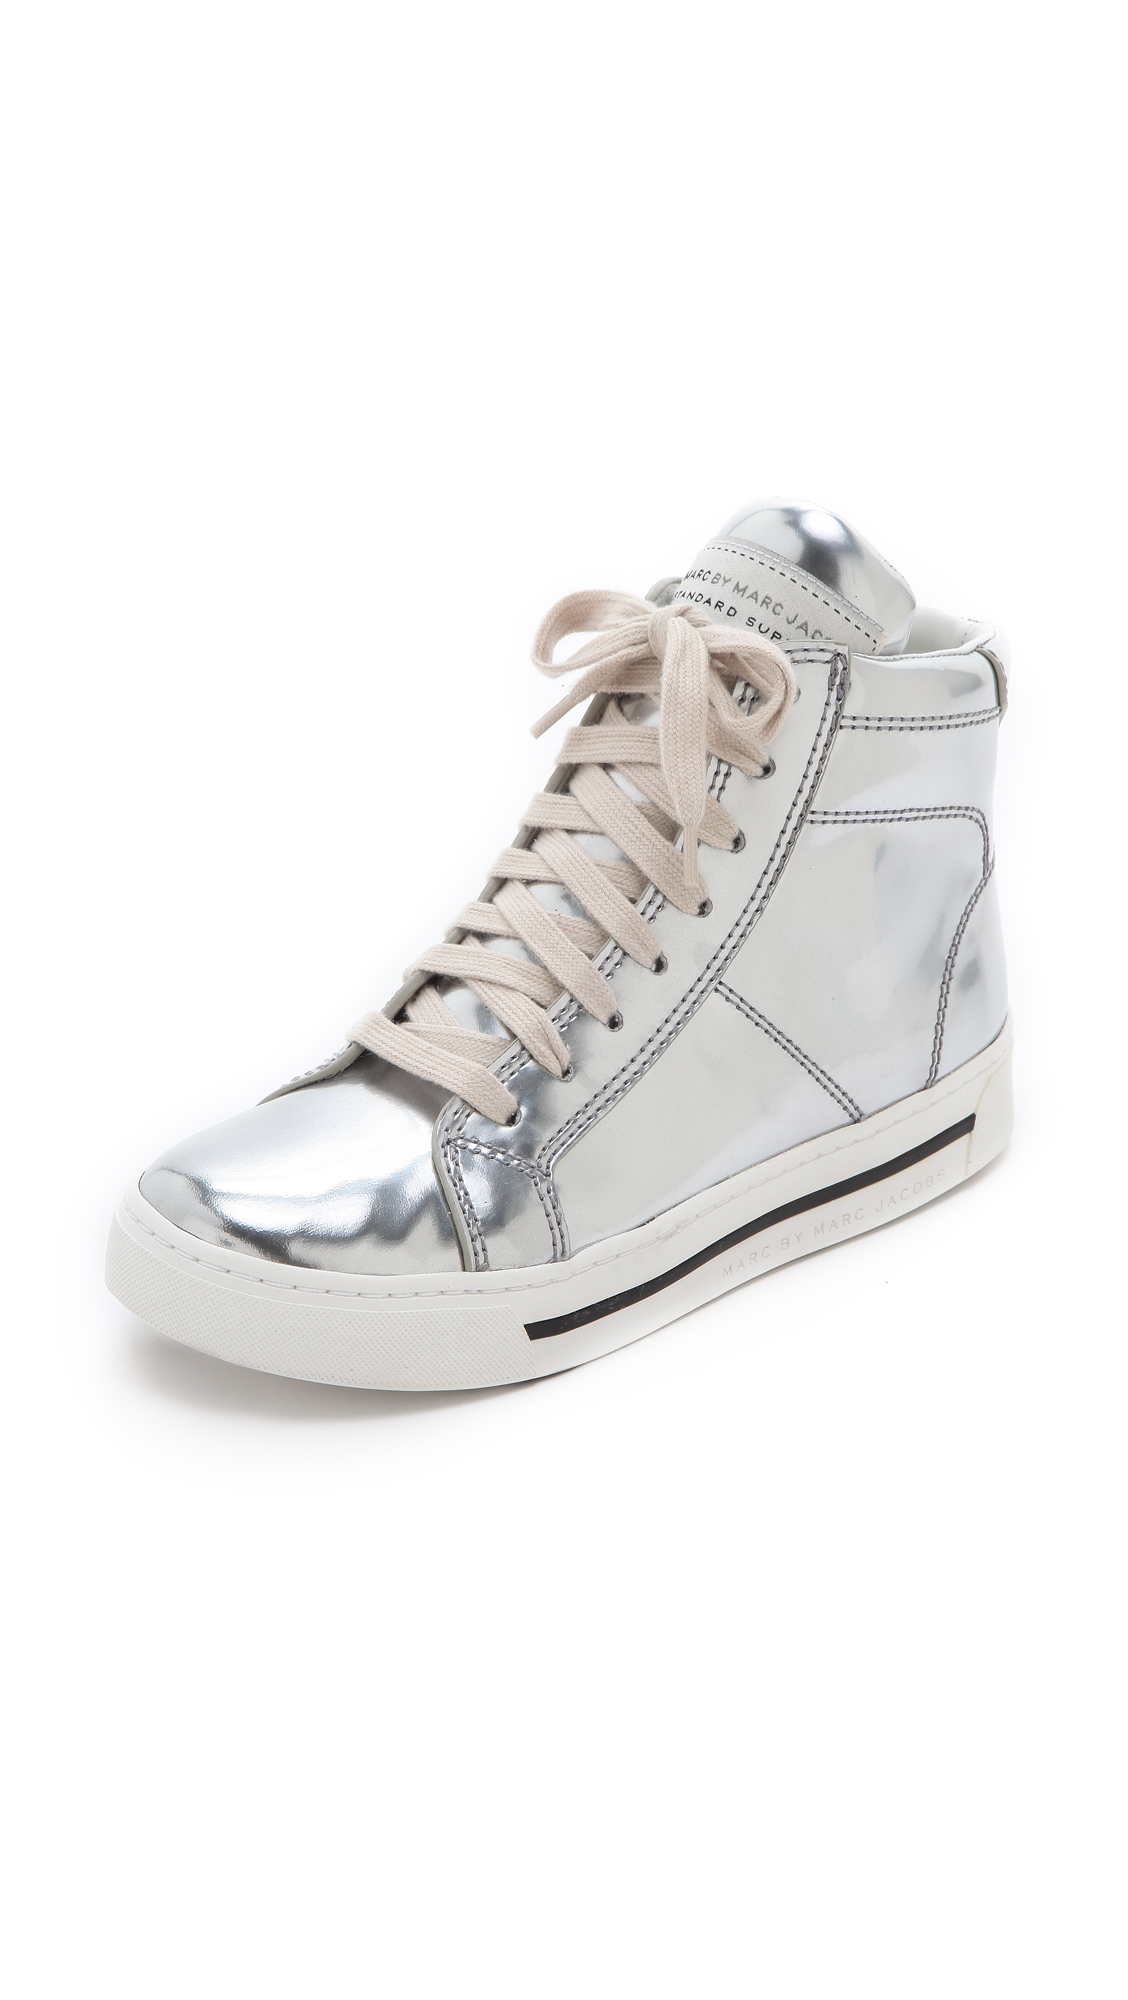 Marc by marc jacobs Mirror High Top Sneakers in Silver | Lyst